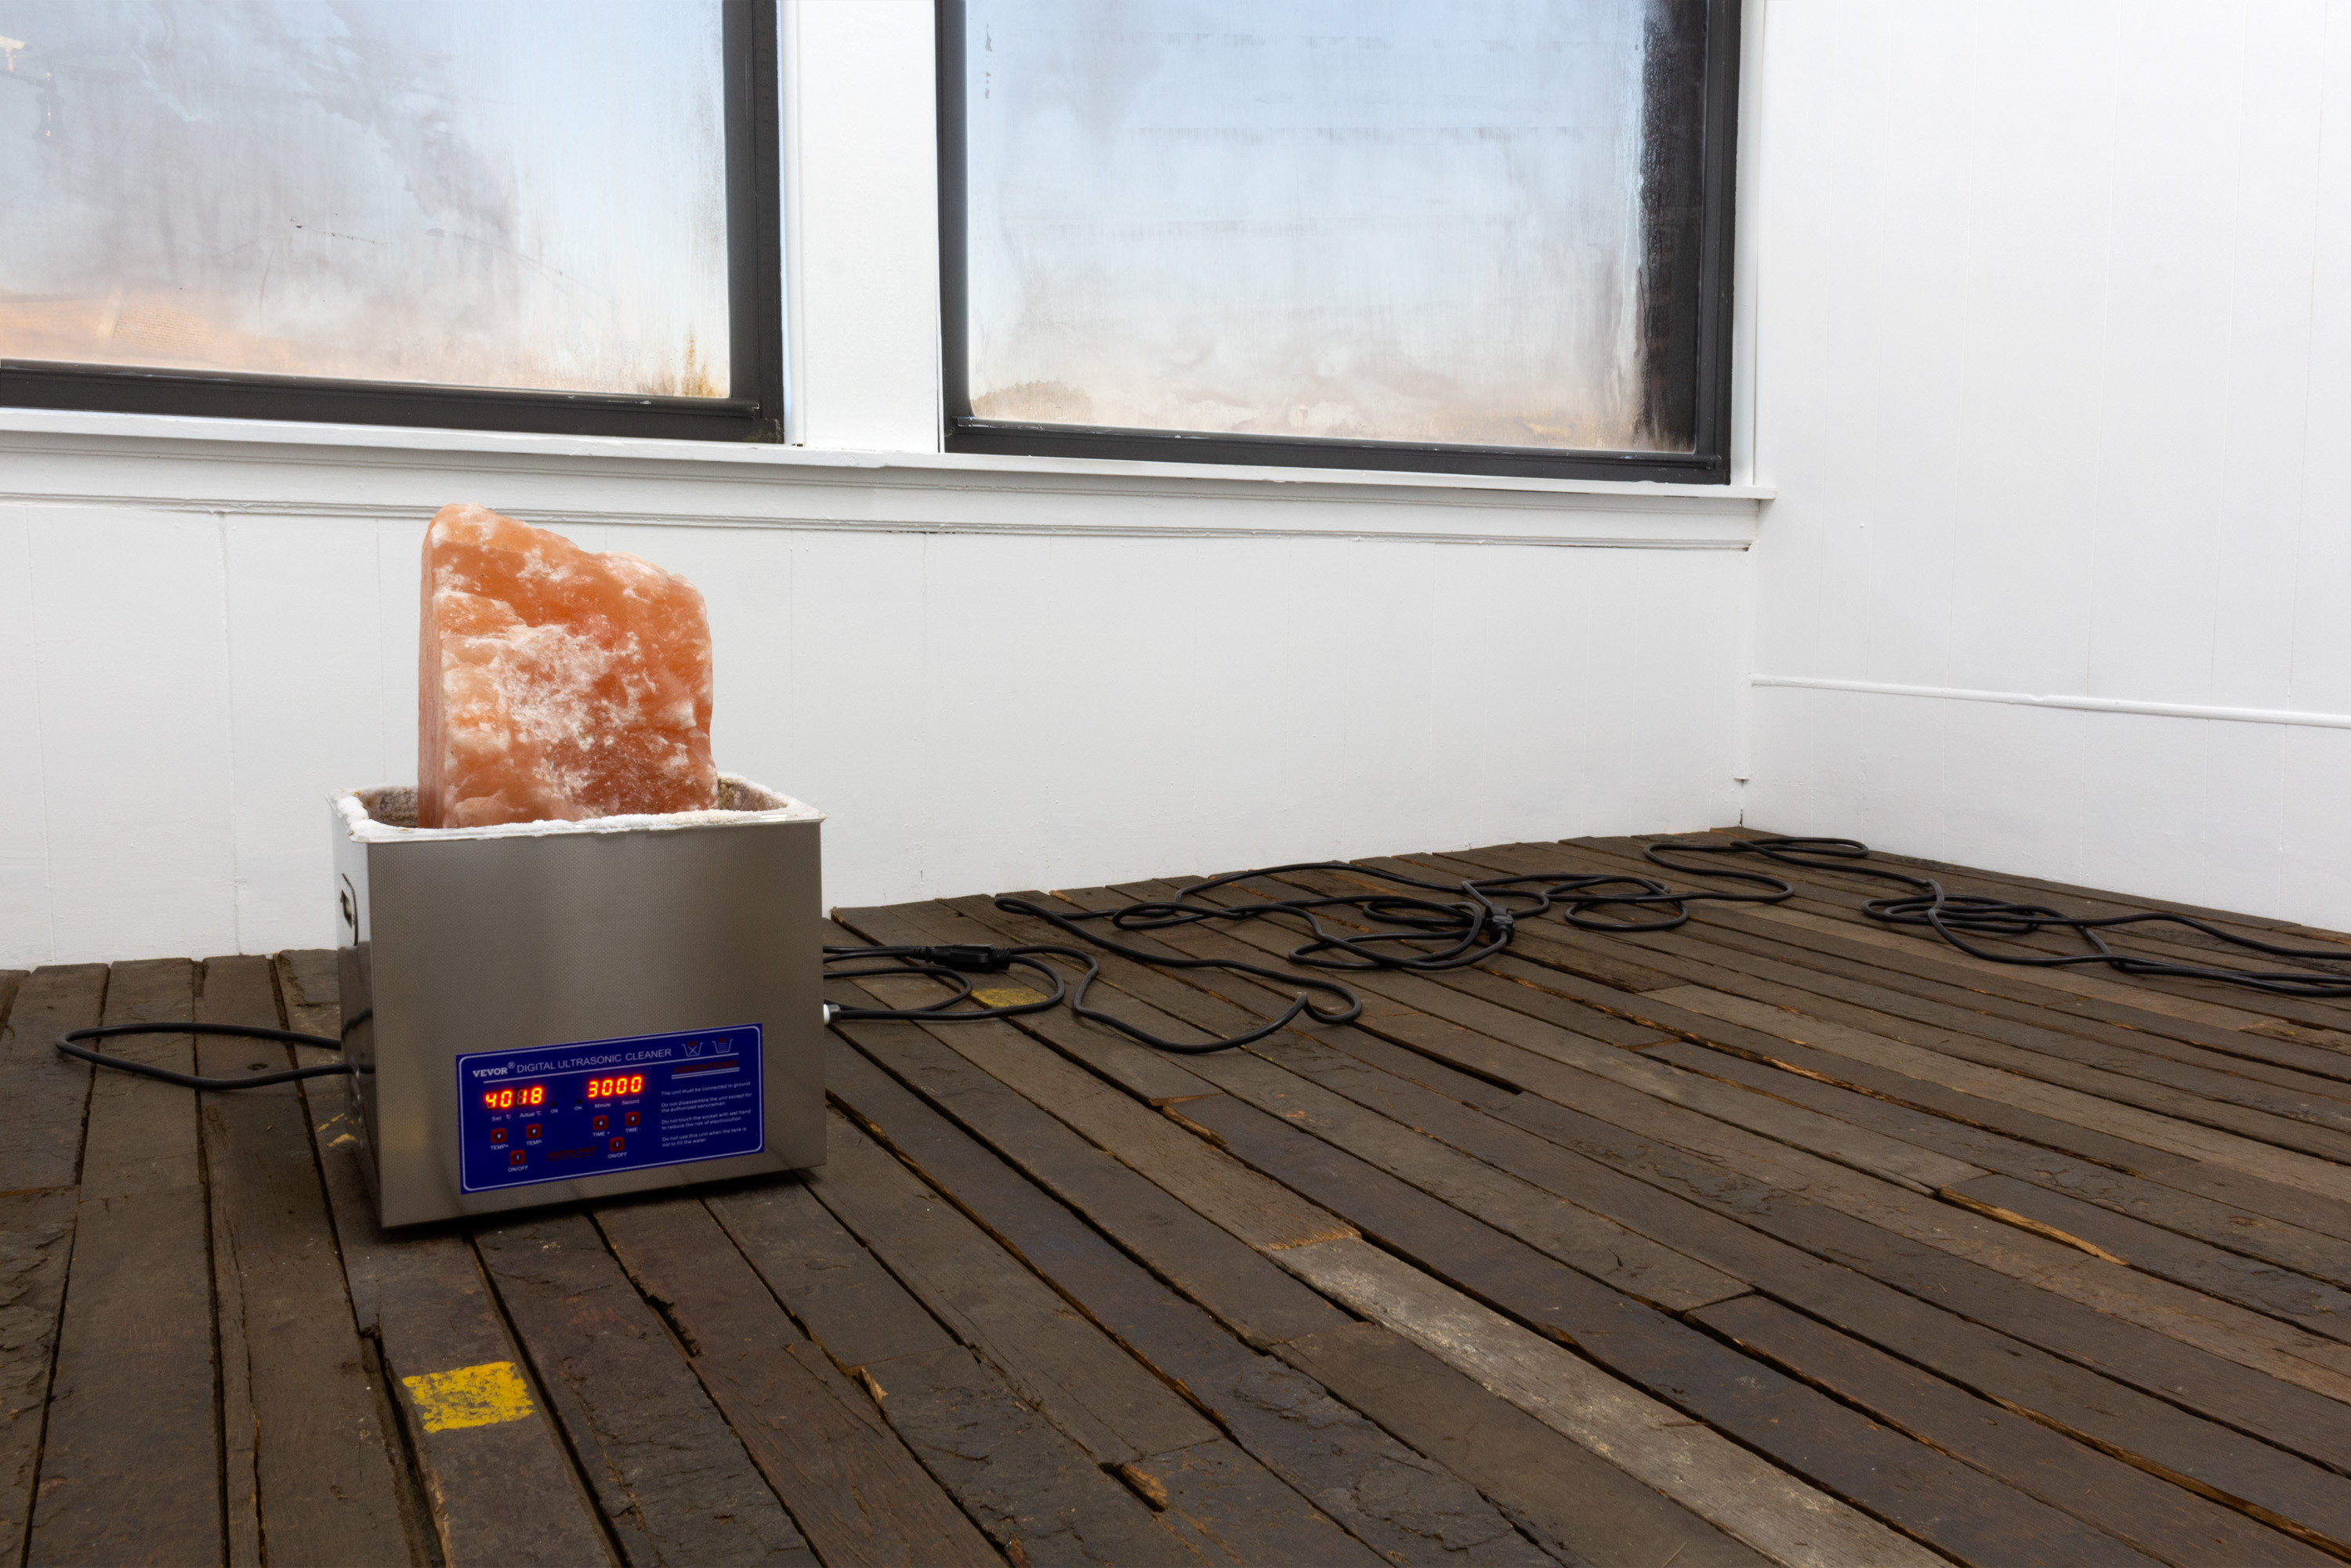 Graham Wiebe, Study for a Water Burial, 2022, Ultrasonic cleaner, water, salt rock, extension cord, 12.5 x 10.5 x 20 in